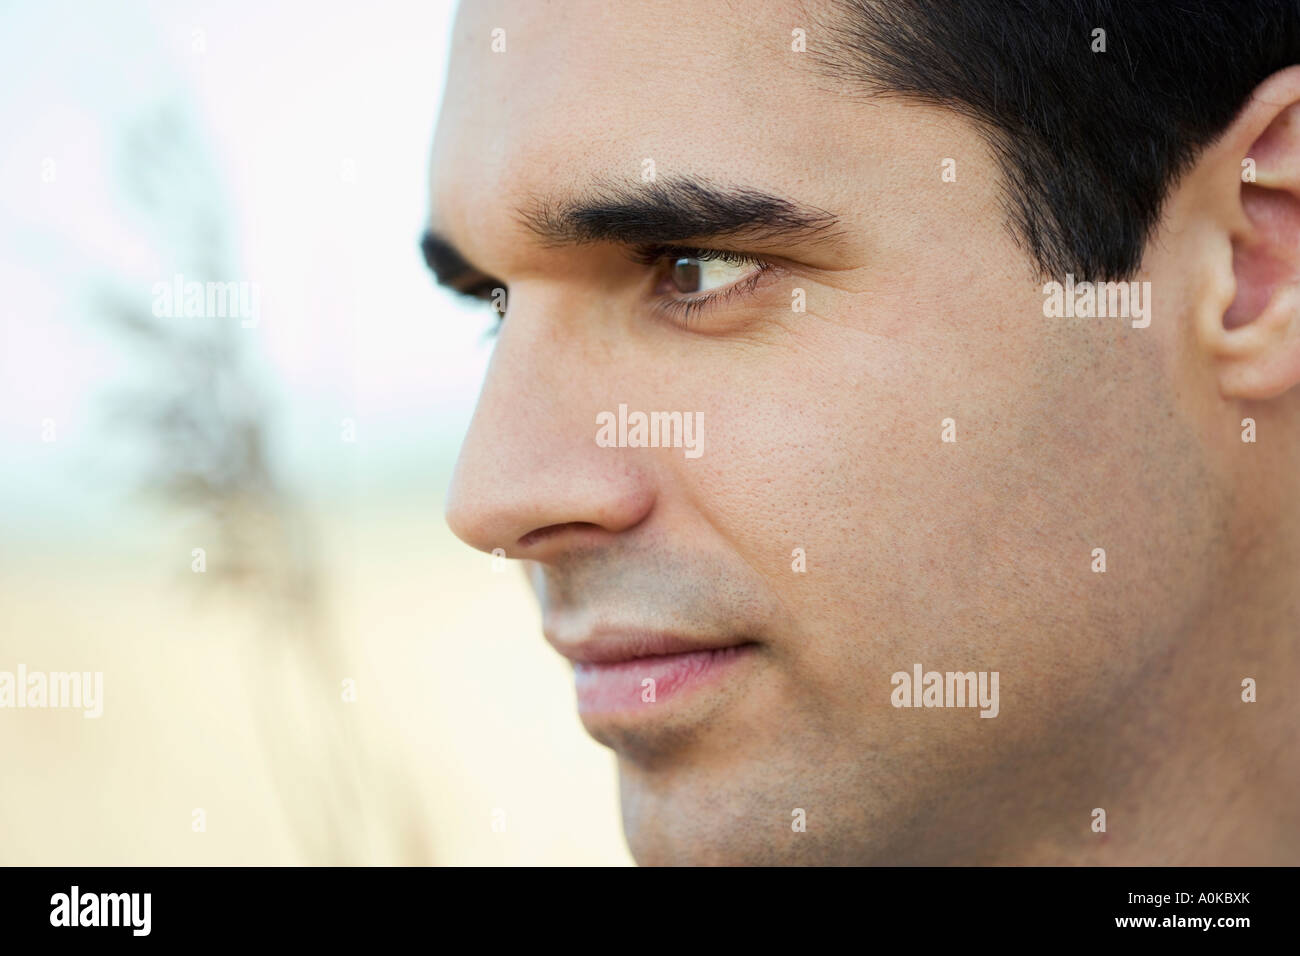 face of young man in profile Stock Photo